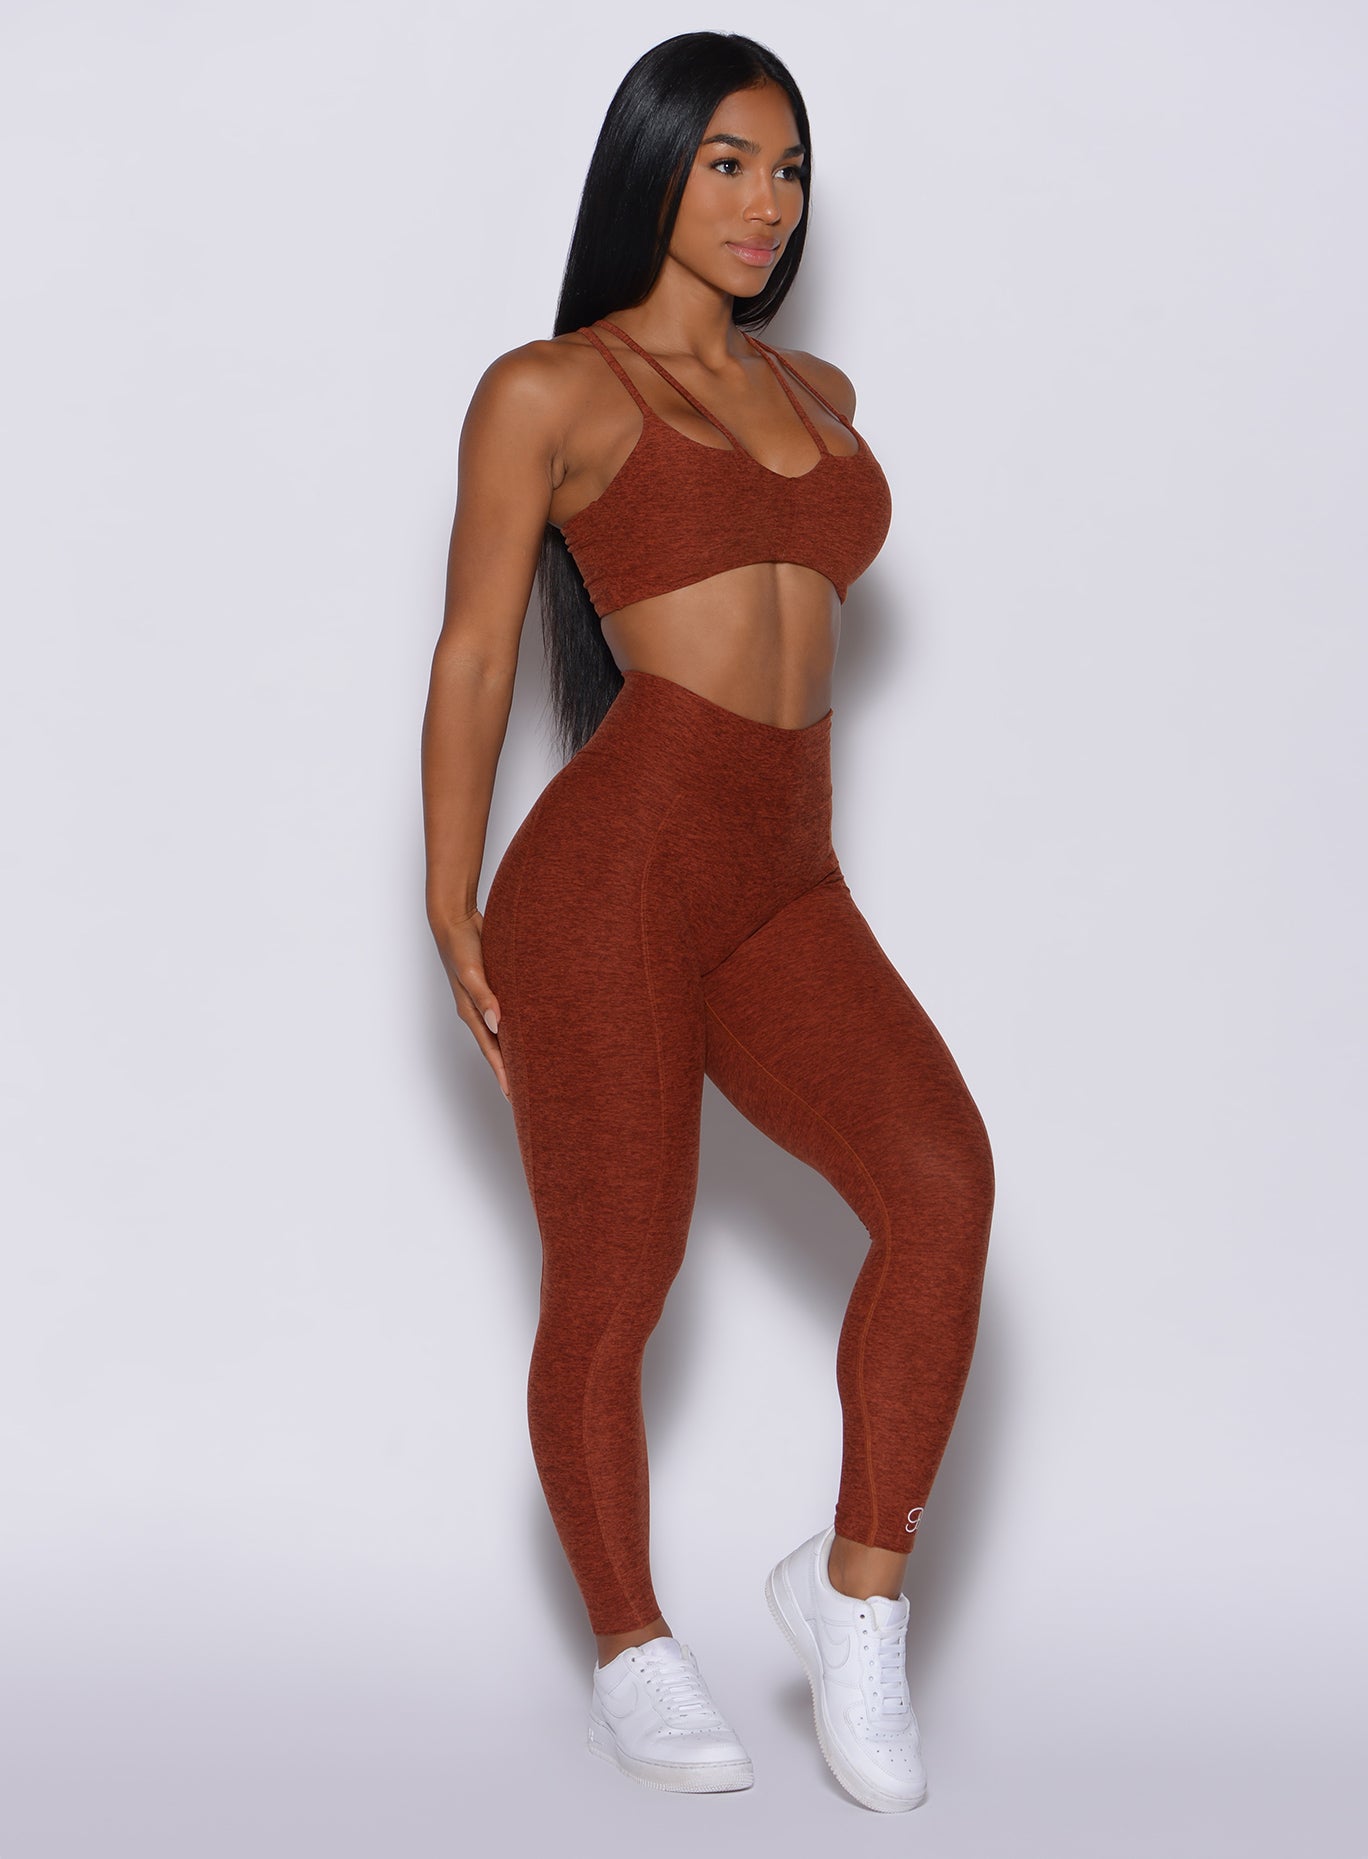 Right side profile view of a model in our cloud leggings in Cinnamon color and a matching bra 